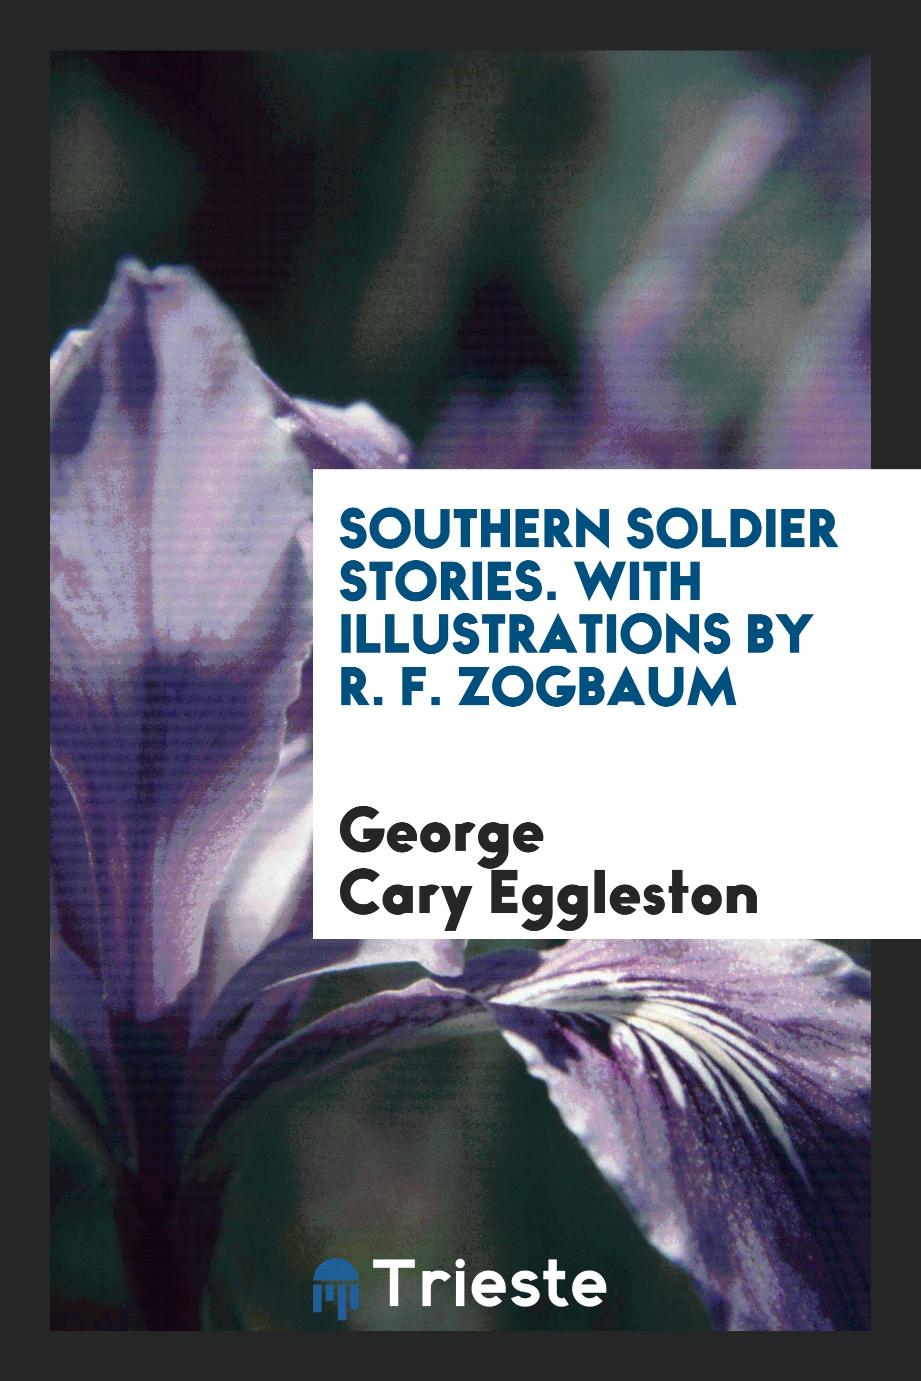 Southern Soldier Stories. With Illustrations by R. F. Zogbaum